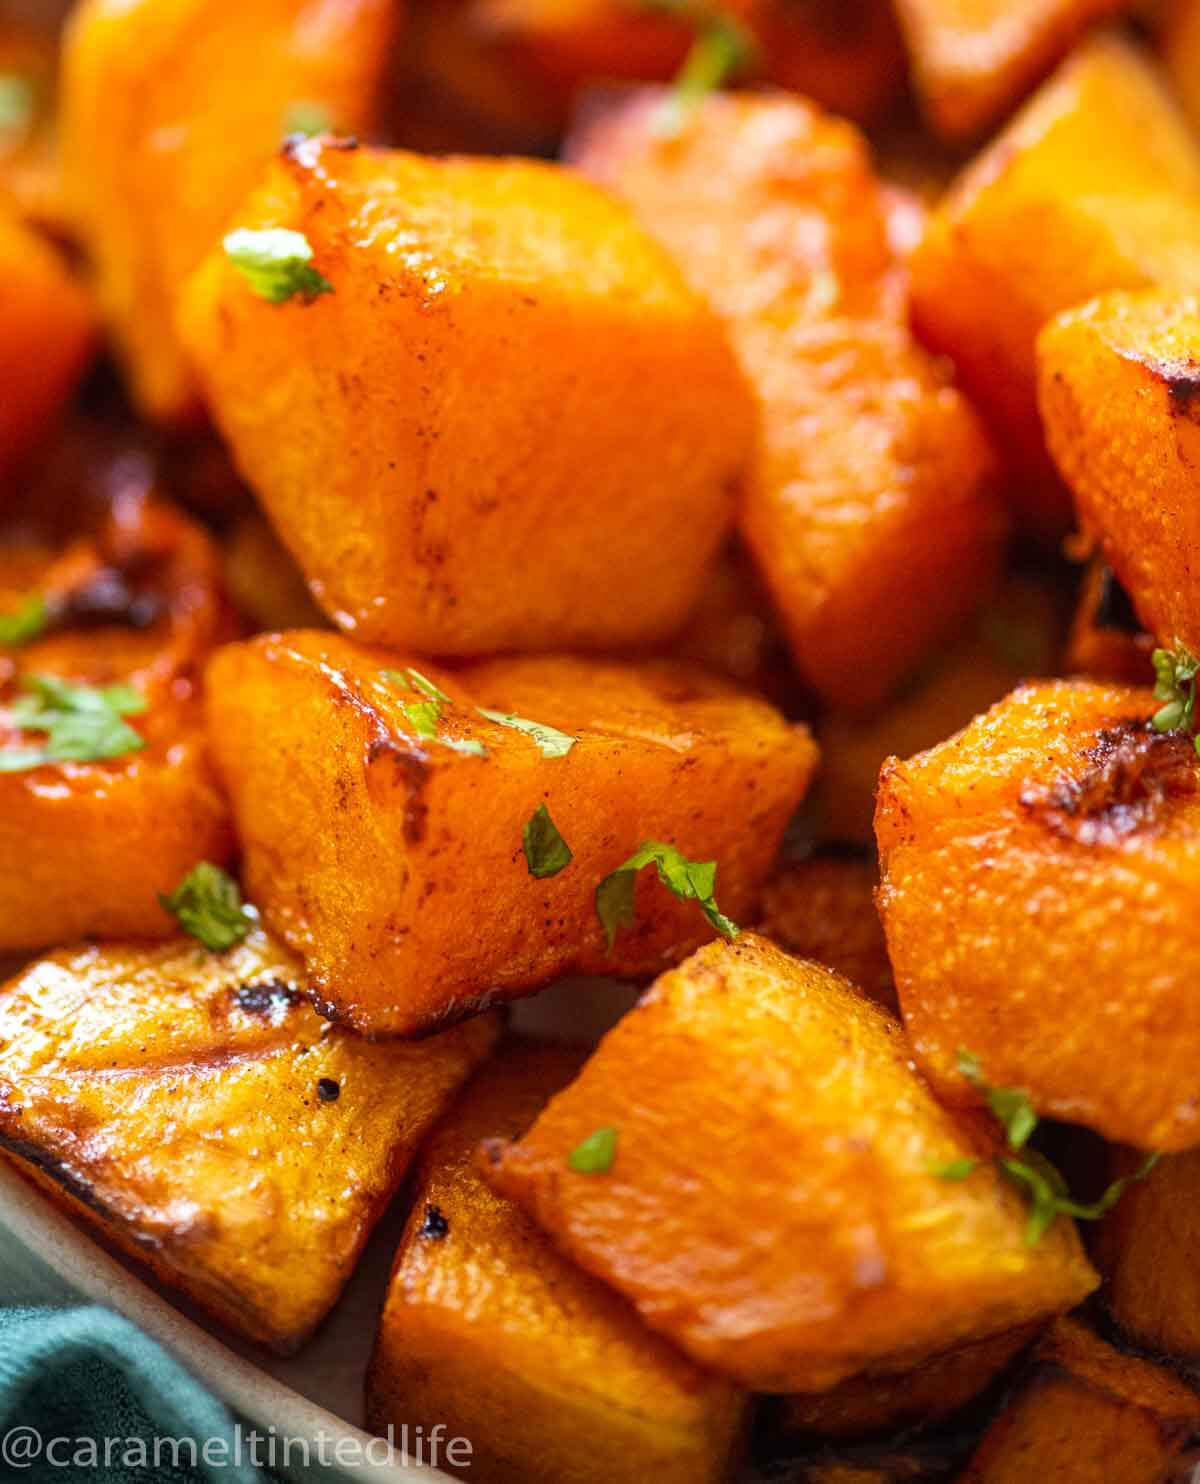 caramelised roasted butternut squash pieces